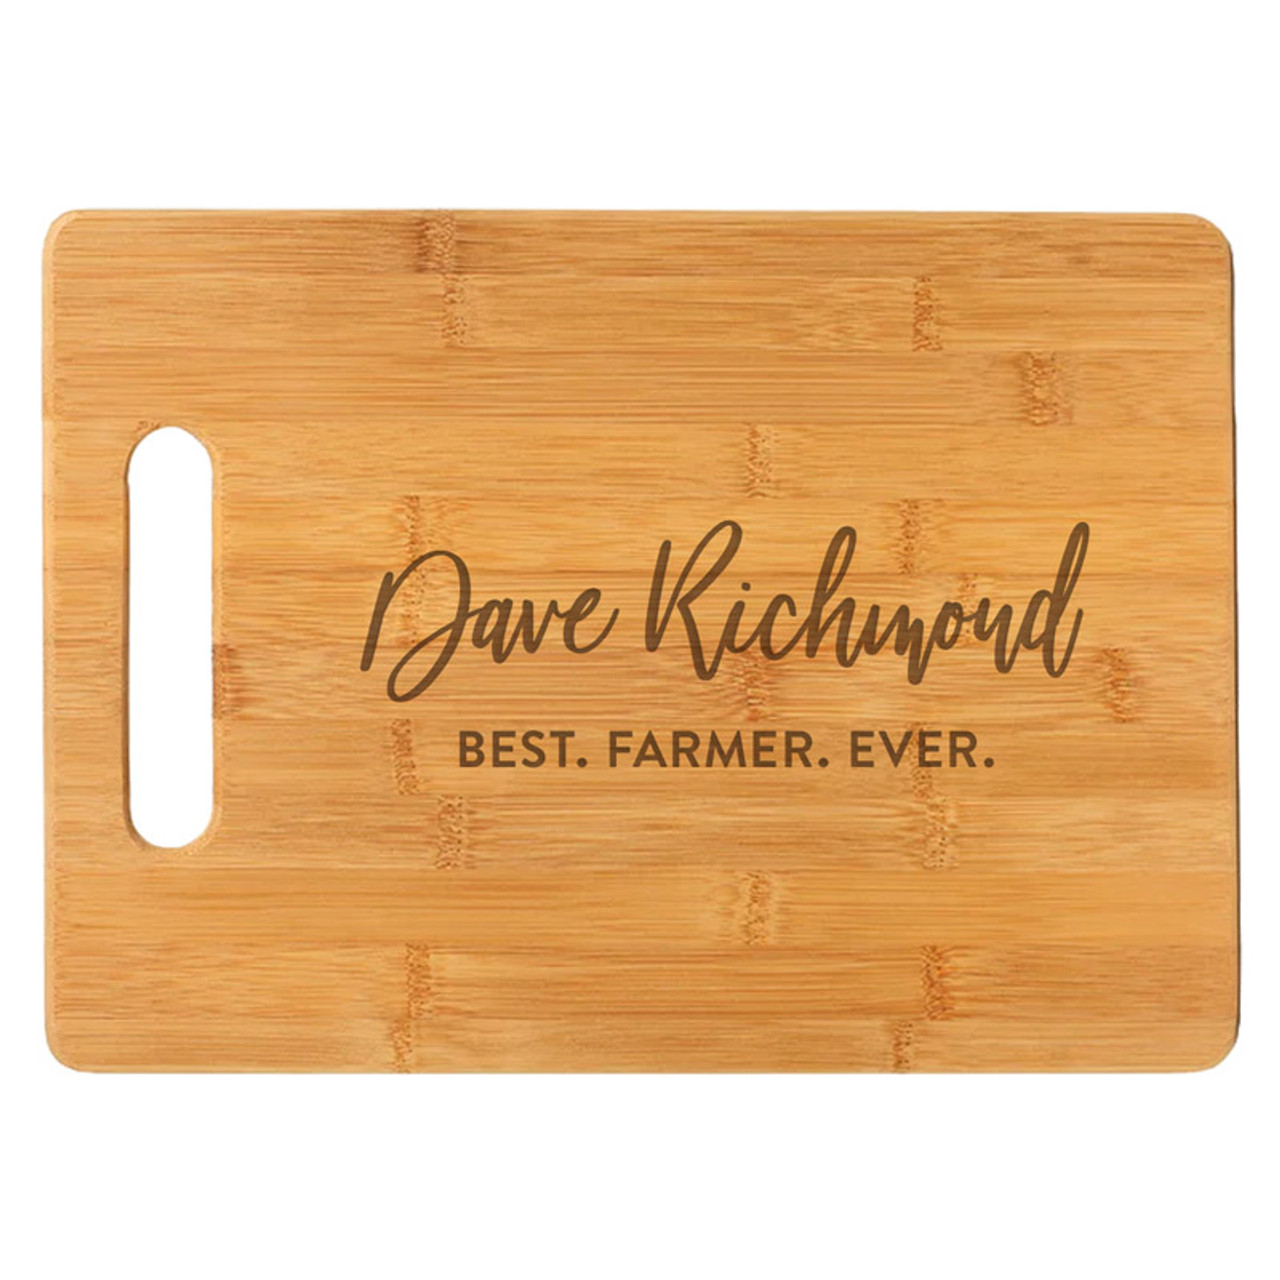 https://cdn11.bigcommerce.com/s-d22a0/images/stencil/1280x1280/products/2342/12253/personalized-cutting-board-best-farmer-ever-CTB_best_farmer__07481.1675116852.jpg?c=2